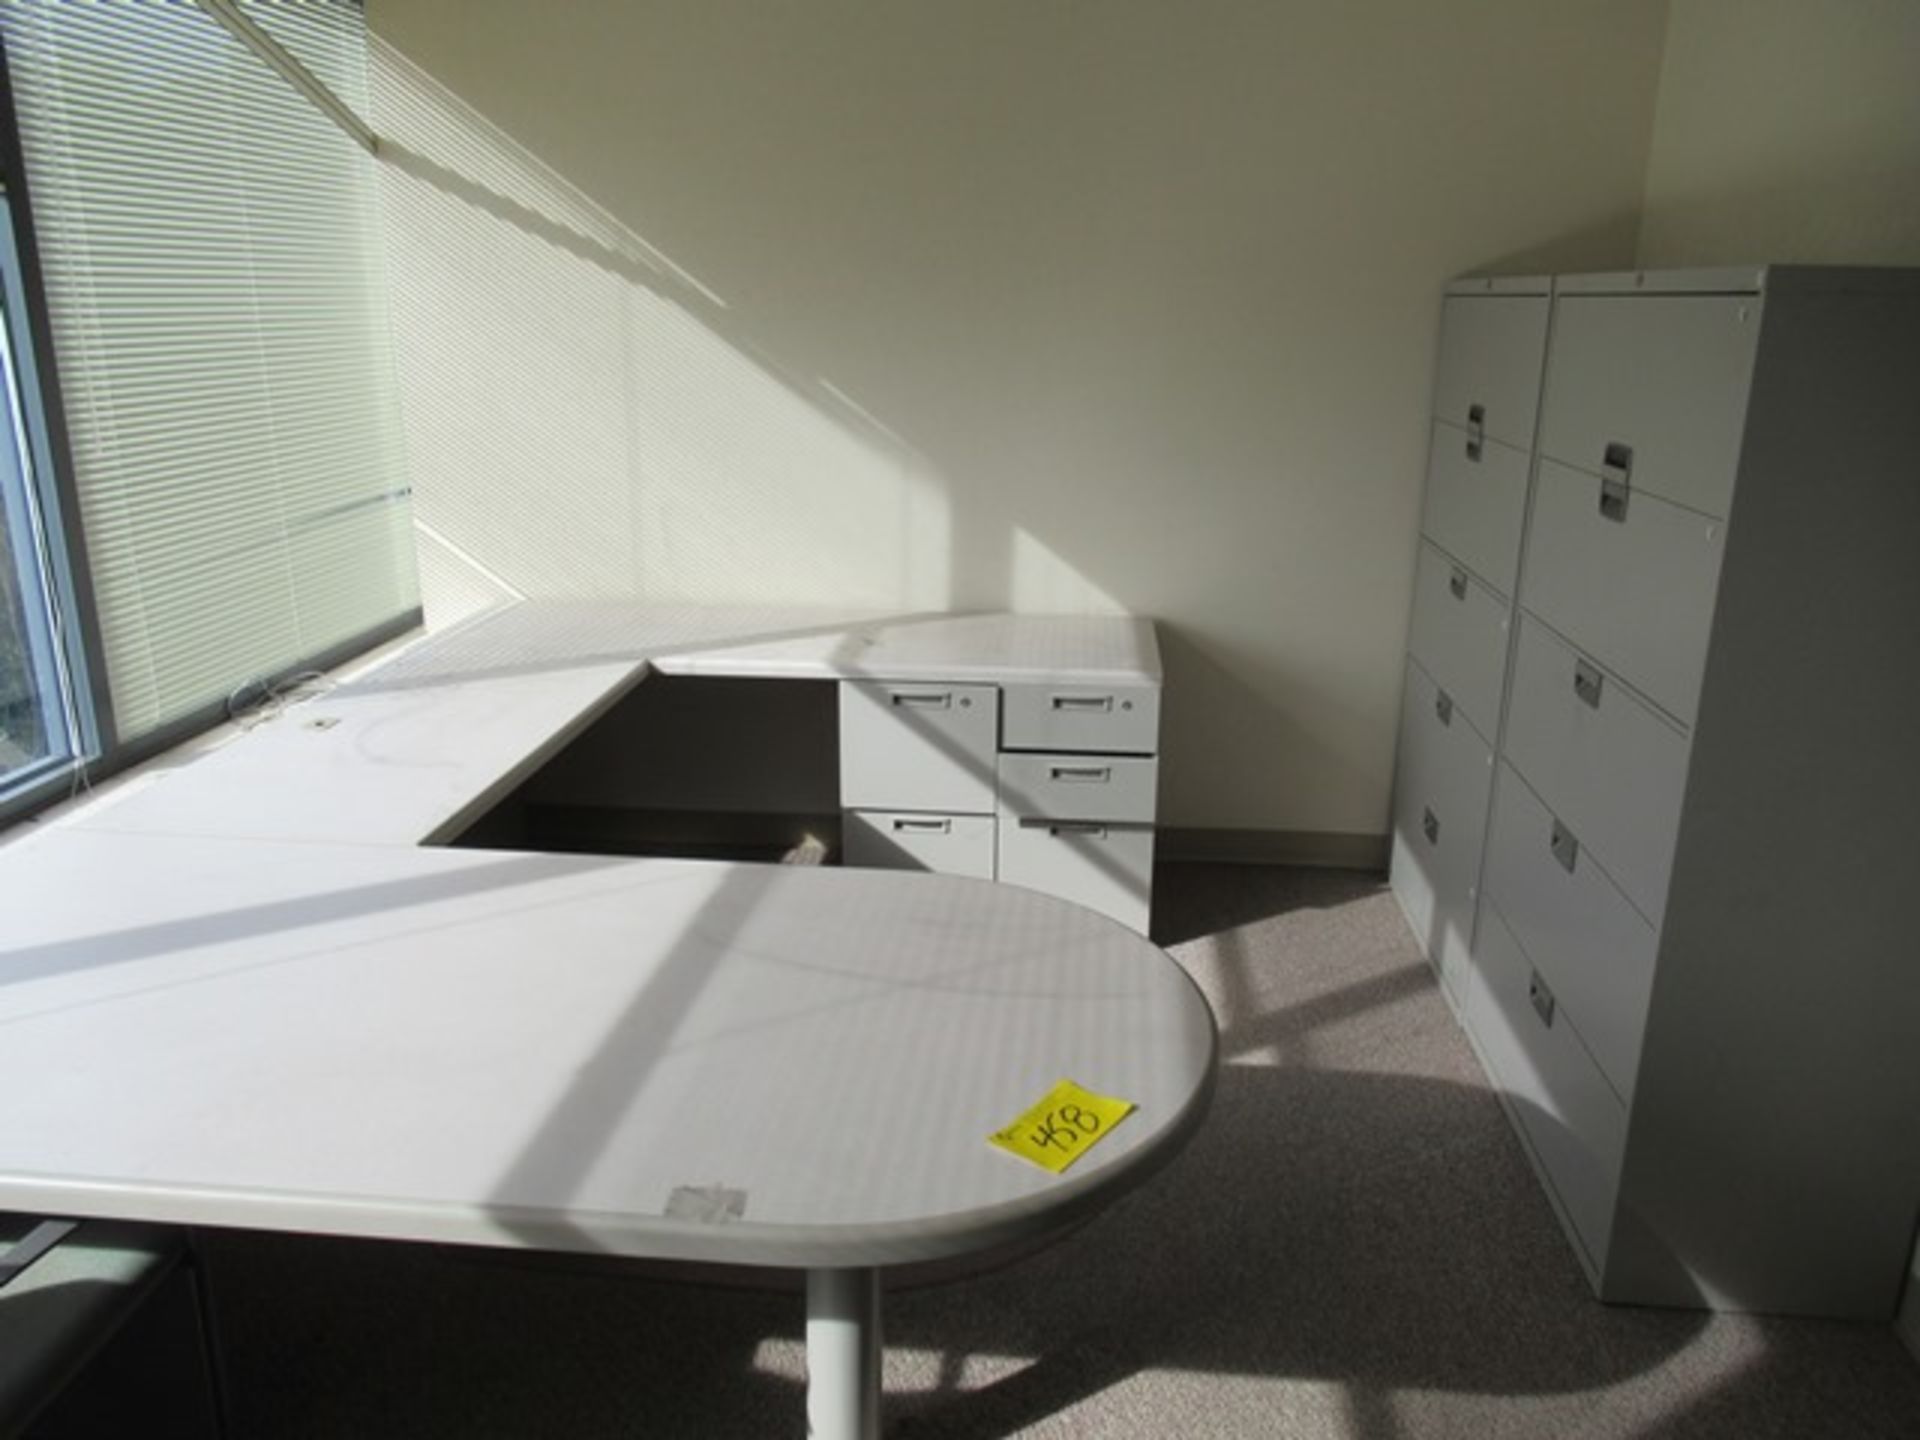 LOT CONTENTS OF 2 OFFICES - DESKS, CHAIRS, FILE CABINETS, ETC. (MO2NDF)